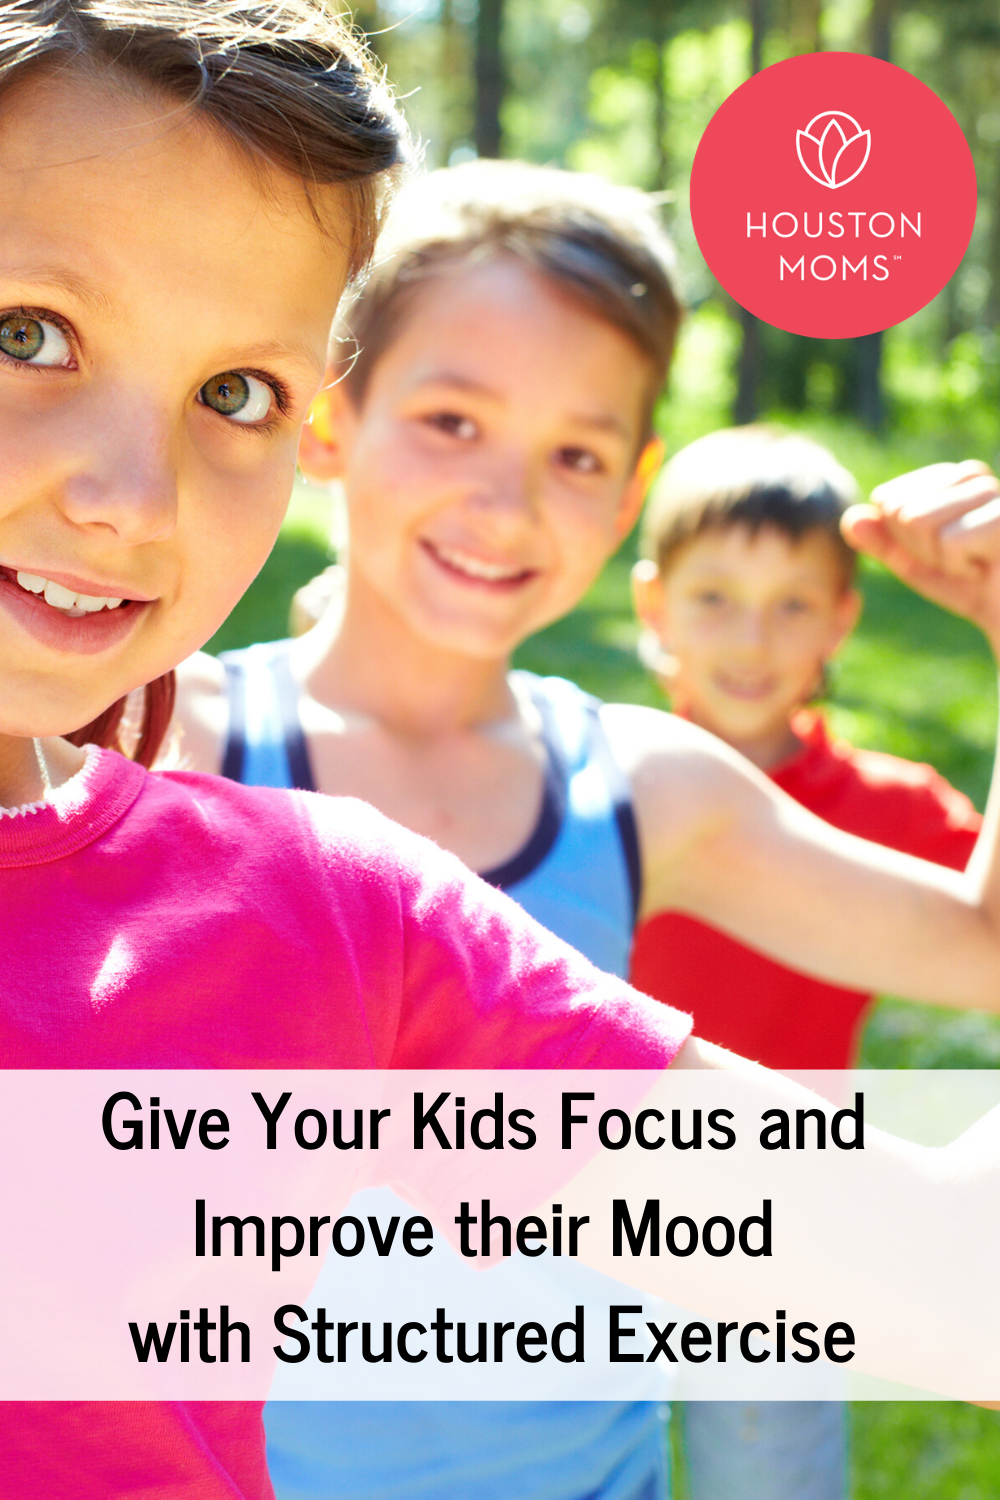 Houston Moms "Give Your Kid Focus and Improve Their Mood With Structured Exercise" #houstonmoms #houstonmomsblog #momsaroundhouston